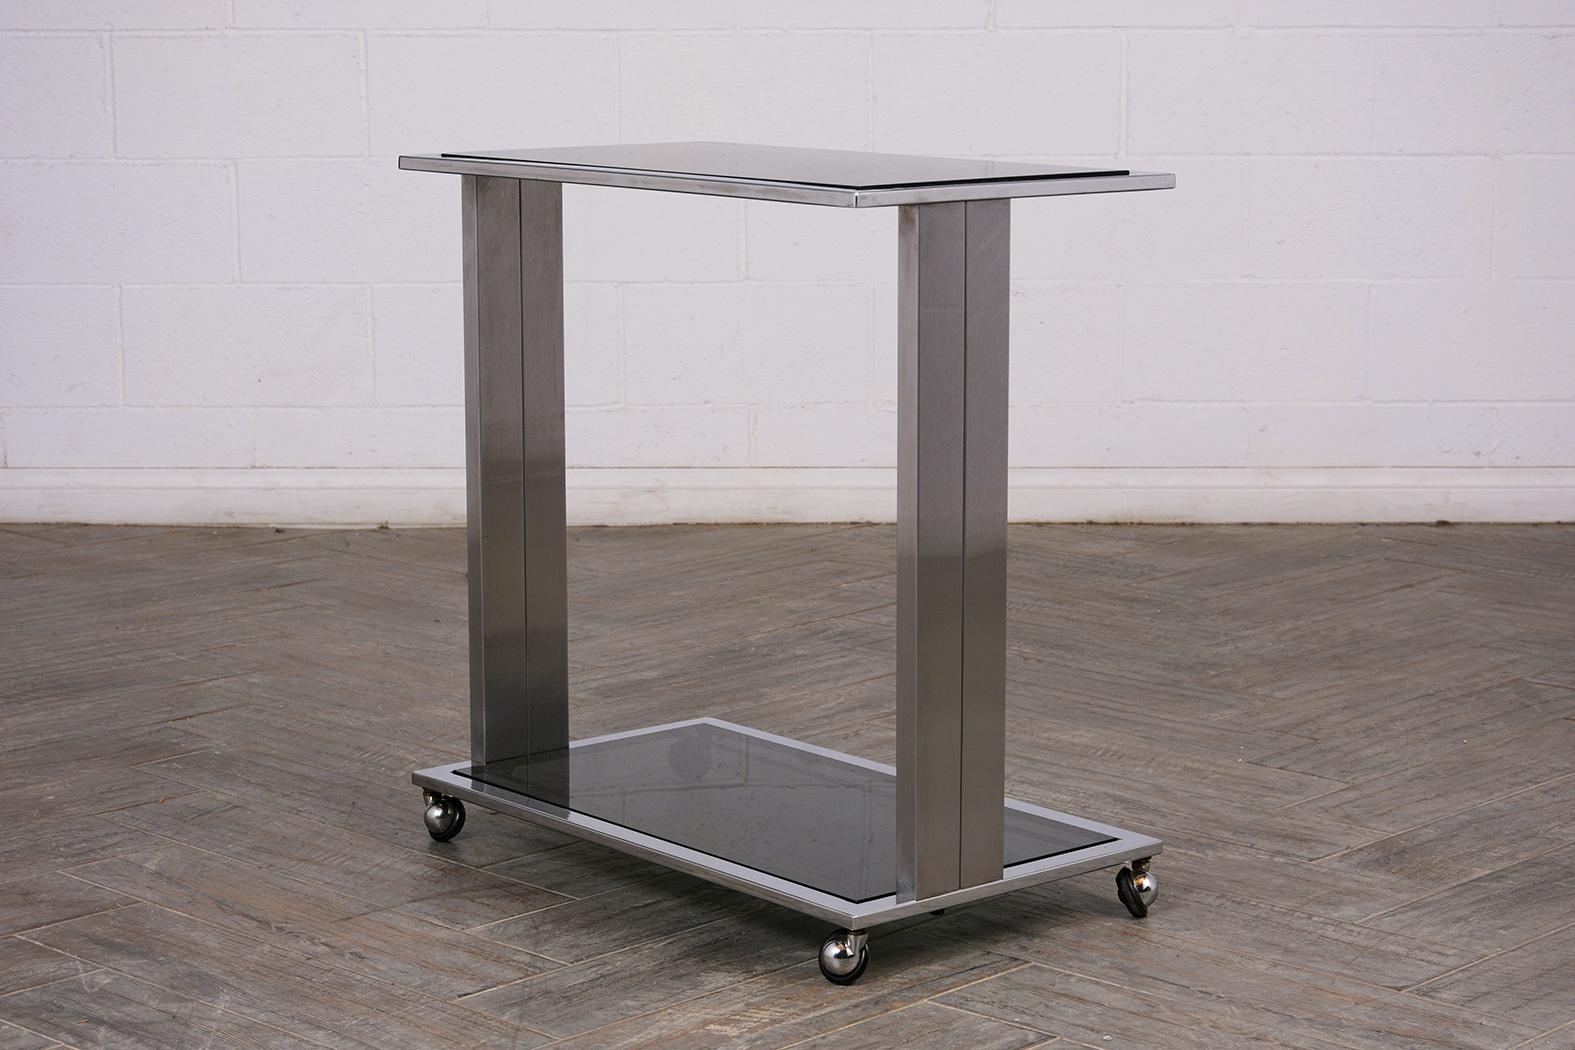 This modern style bar cart has a new chrome frame and is in good condition. The cart has two tiers and features two new smoke glass inserts. It has caster wheels which are in good working condition. This bar cart is sleek, elegant, and ready to be